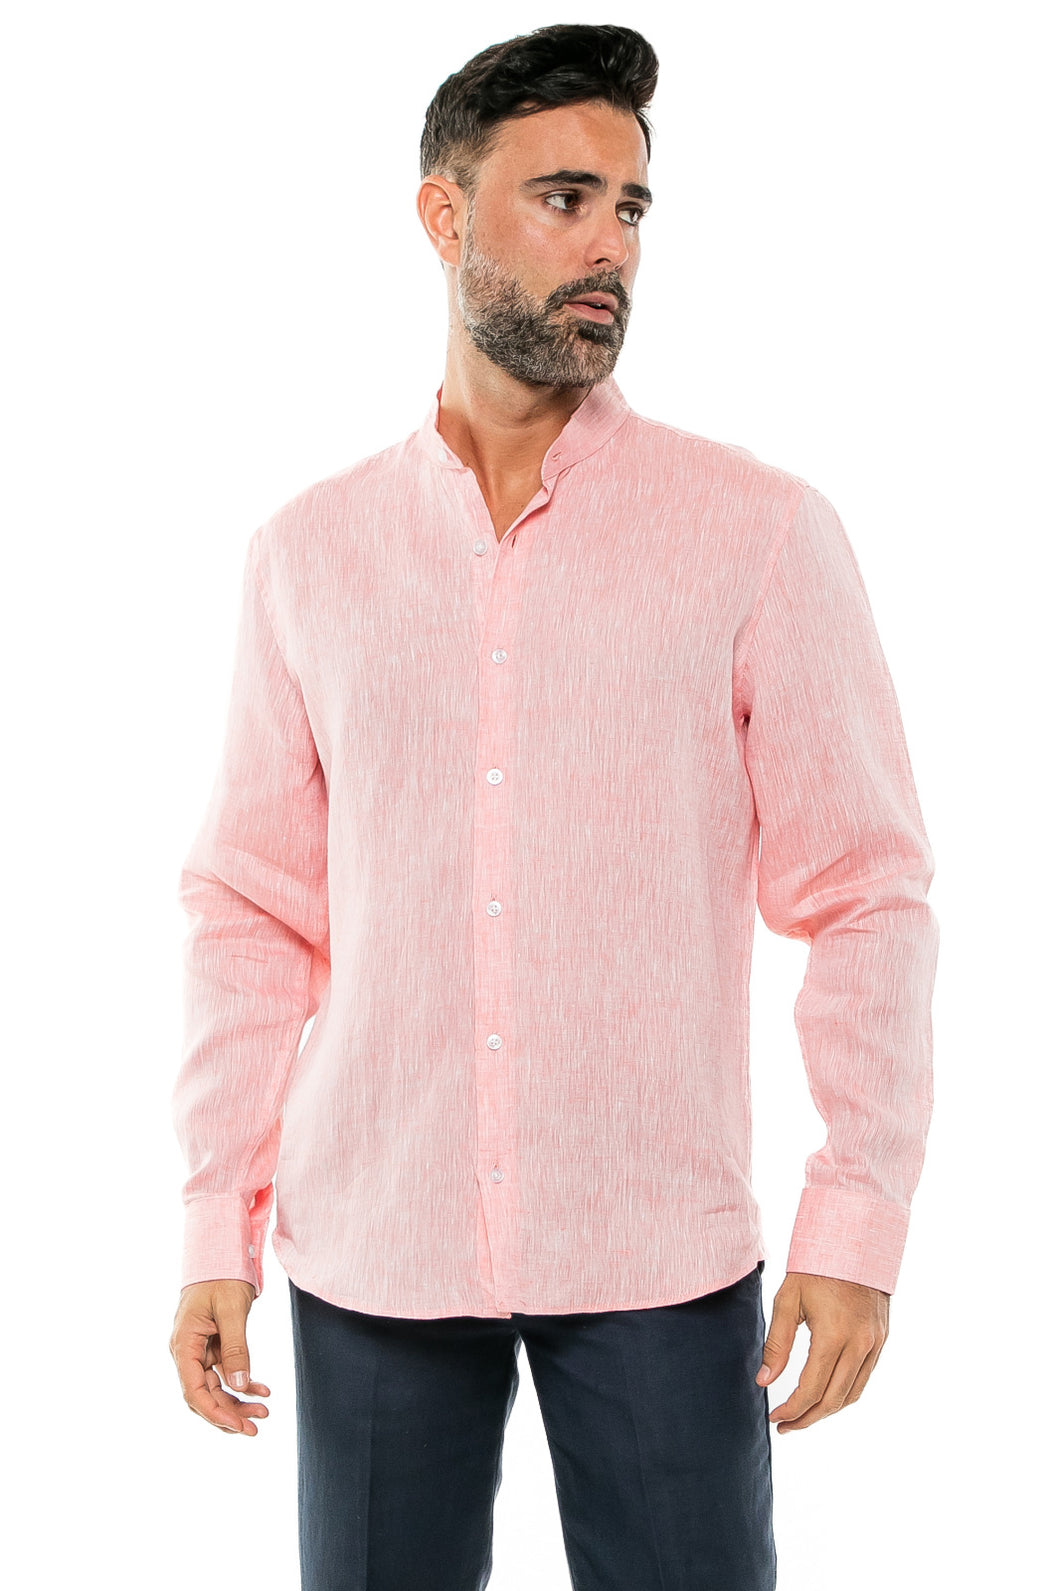 Buy Men's Solid Linen Shirt with Mandarin Collar and Long Sleeves